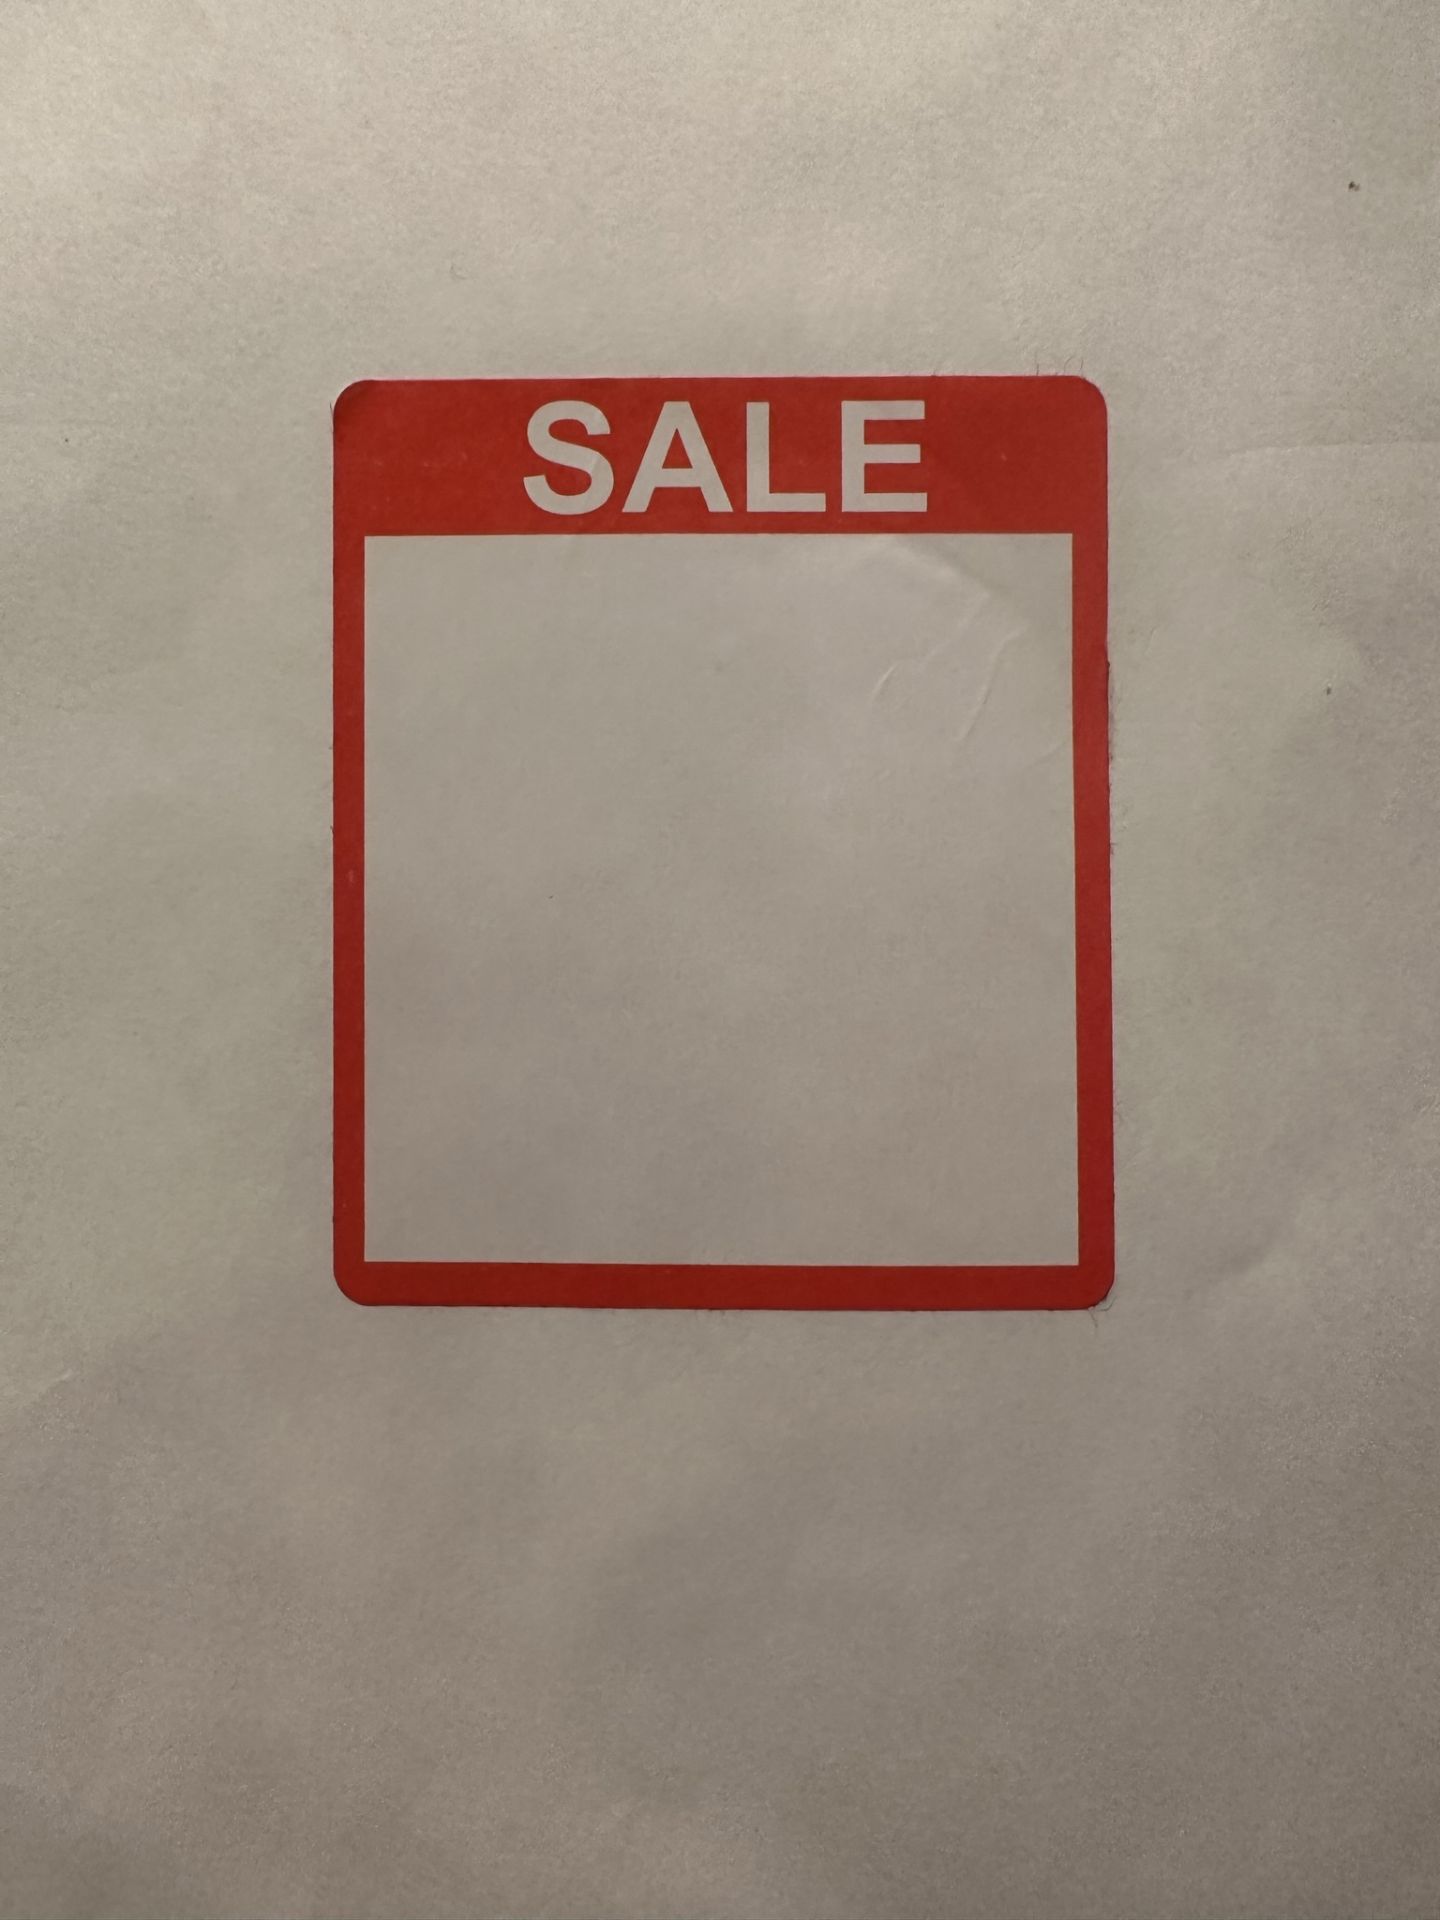 1000 Bright Red Sale Price Point Stickers, Sticky Labels 40 x 50 - Image 2 of 2